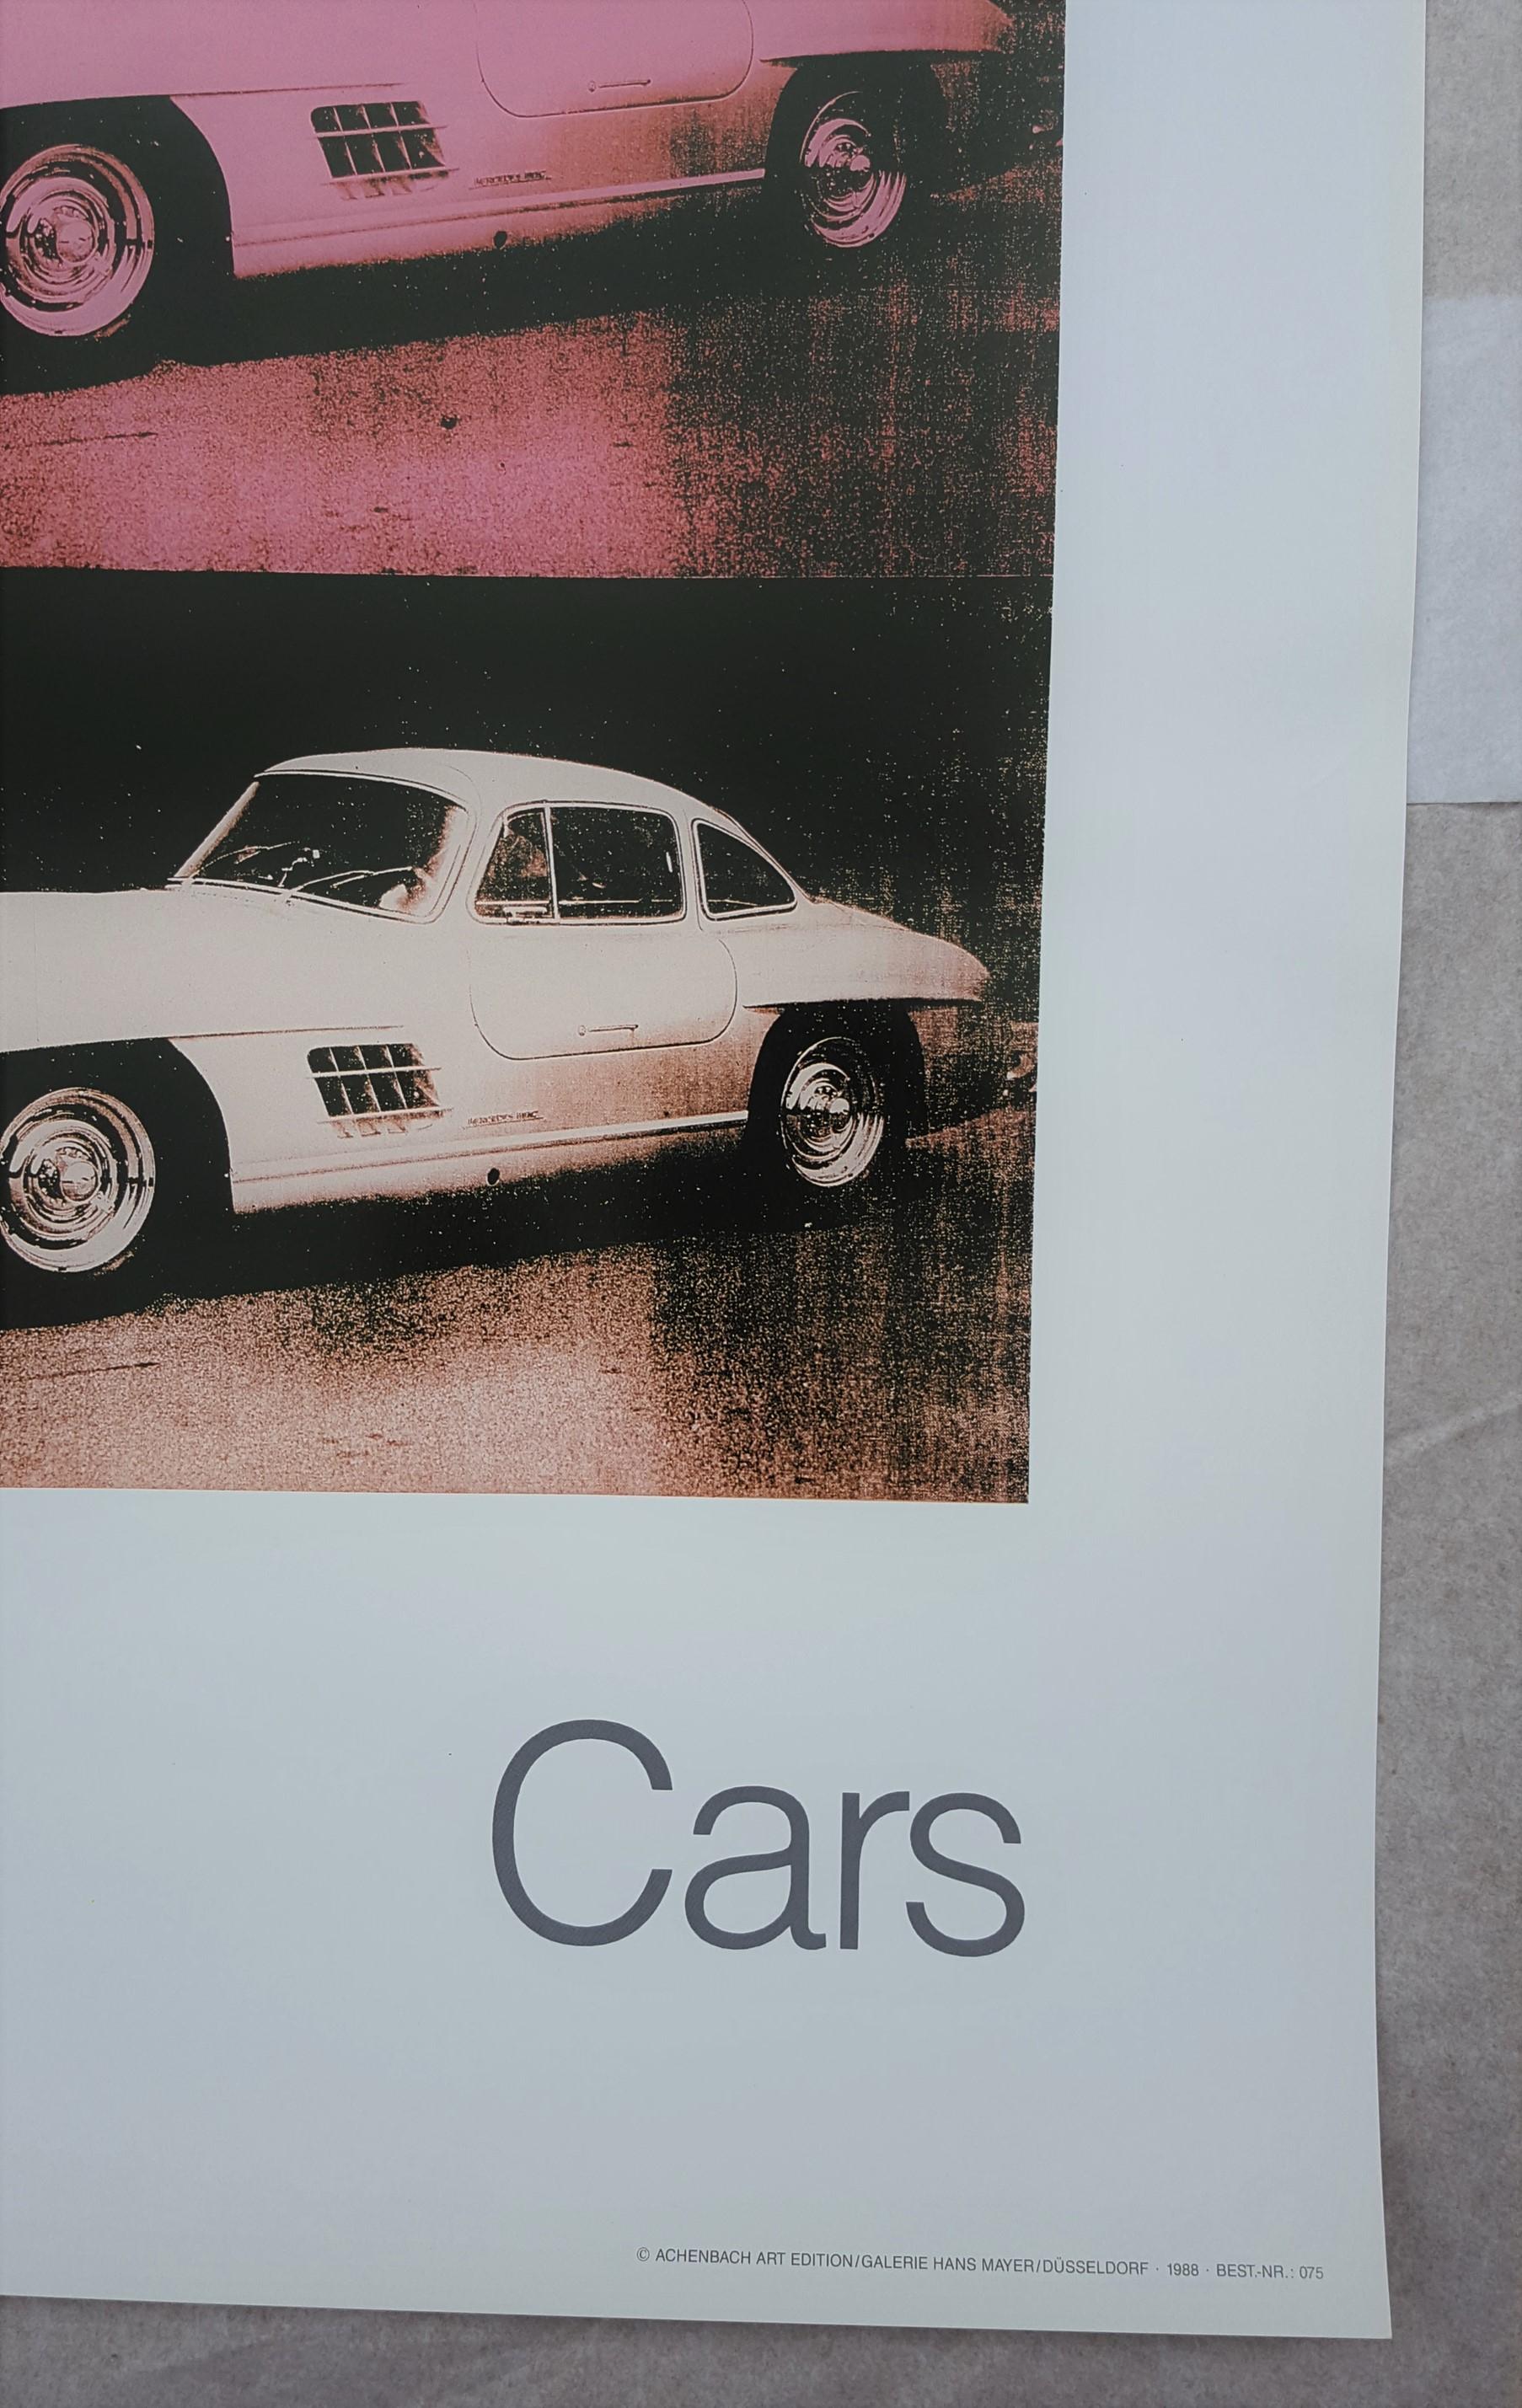 Cars: Mercedes-Benz 300 SL Coupe, 1954 - Pop Art Print by (after) Andy Warhol